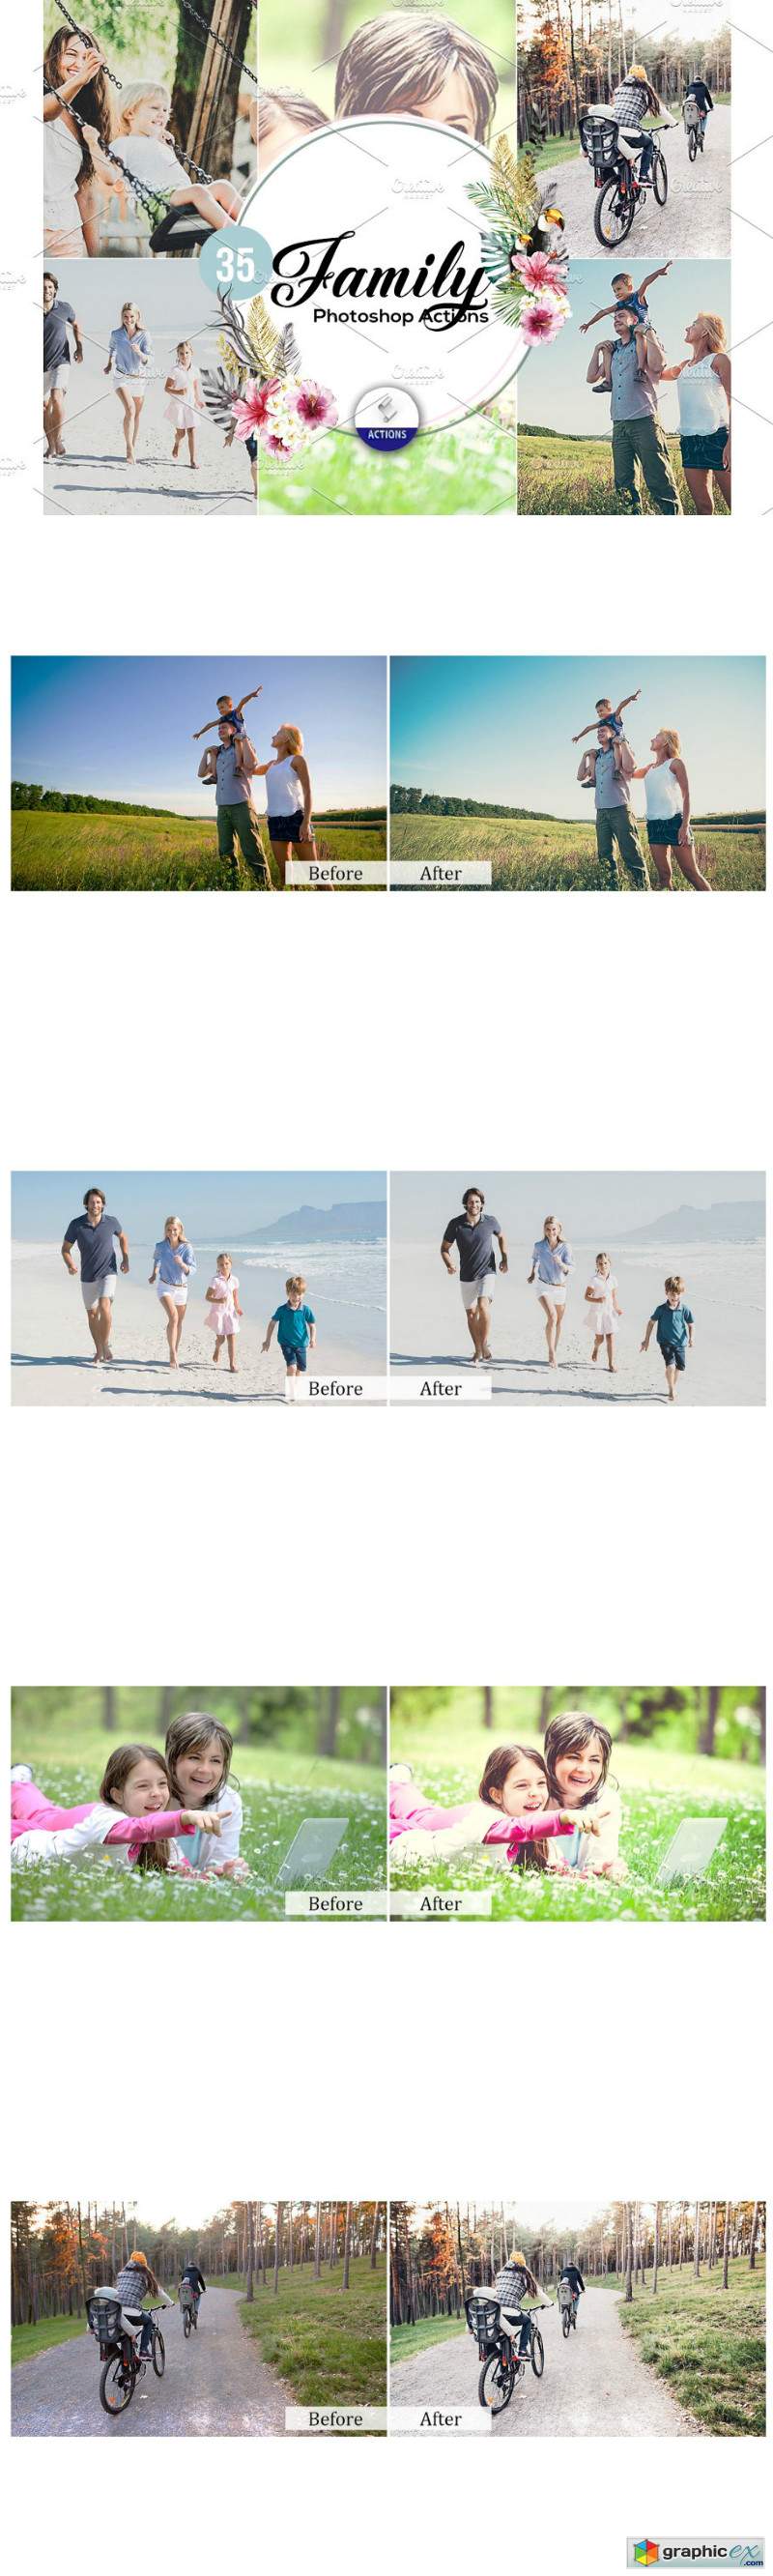 35 Family Photoshop Actions